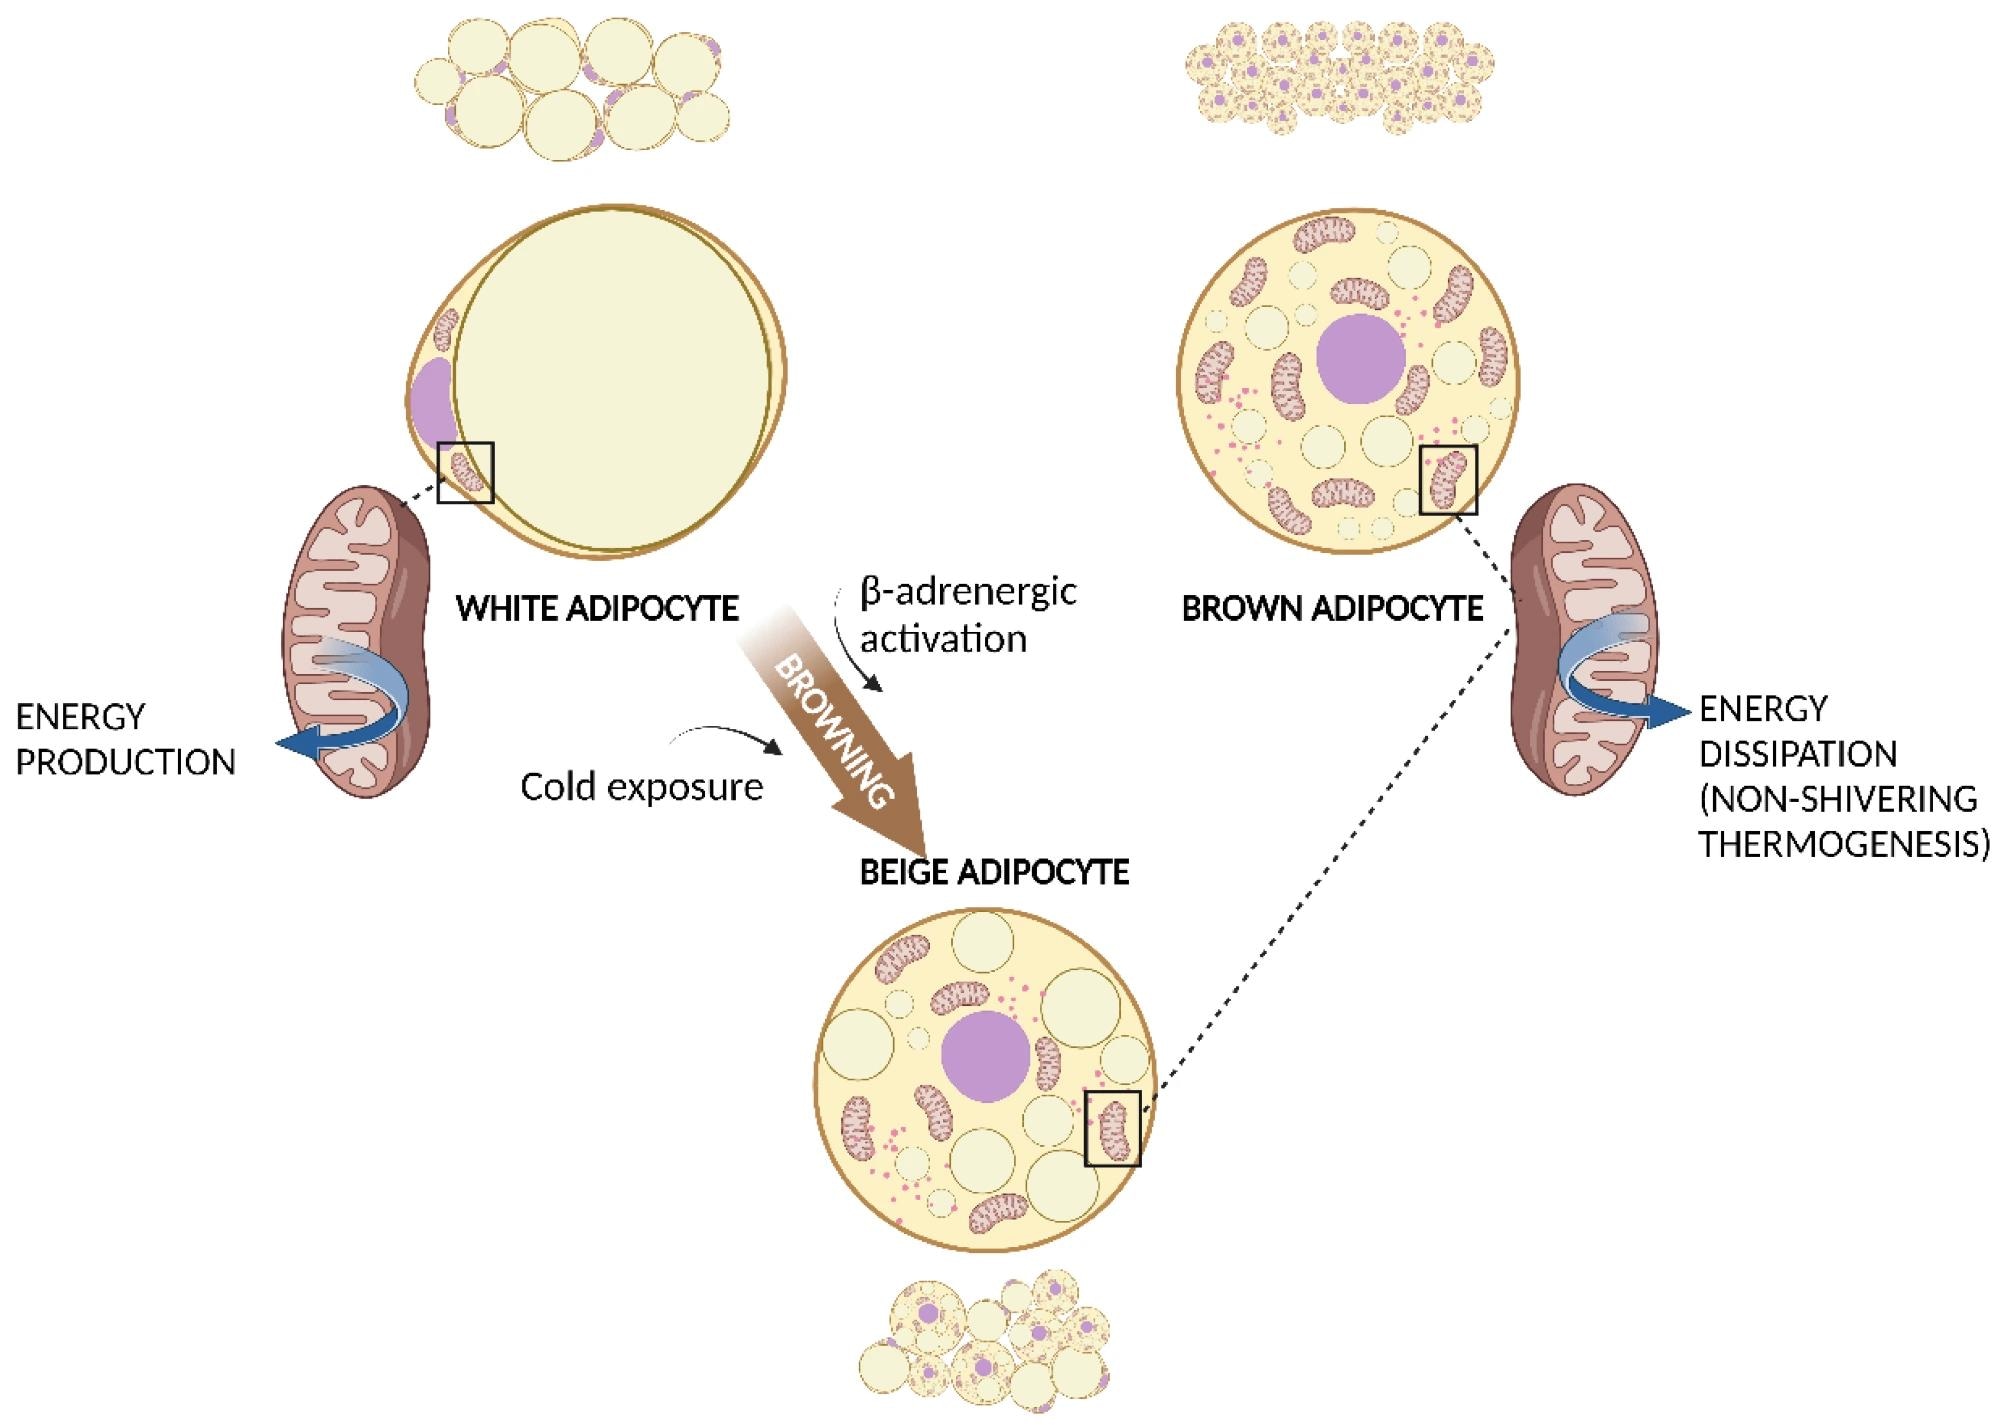 WAT, BAT, and WAT browning. White adipocyte has one large droplet in the centre of the cell that compresses nucleus and mitochondria at one pole. Brown adipocyte has multiple small lipid droplets and more mitochondria, spread out between the droplets. Beige adipocyte has intermediate characteristics. Cold exposure and β-adrenergic activation determine the browning of WAT. Both brown and beige mitochondria are involved in non-shivering thermogenesis.  Abbreviations: BAT, brown adipose tissue; WAT, white adipose tissue.